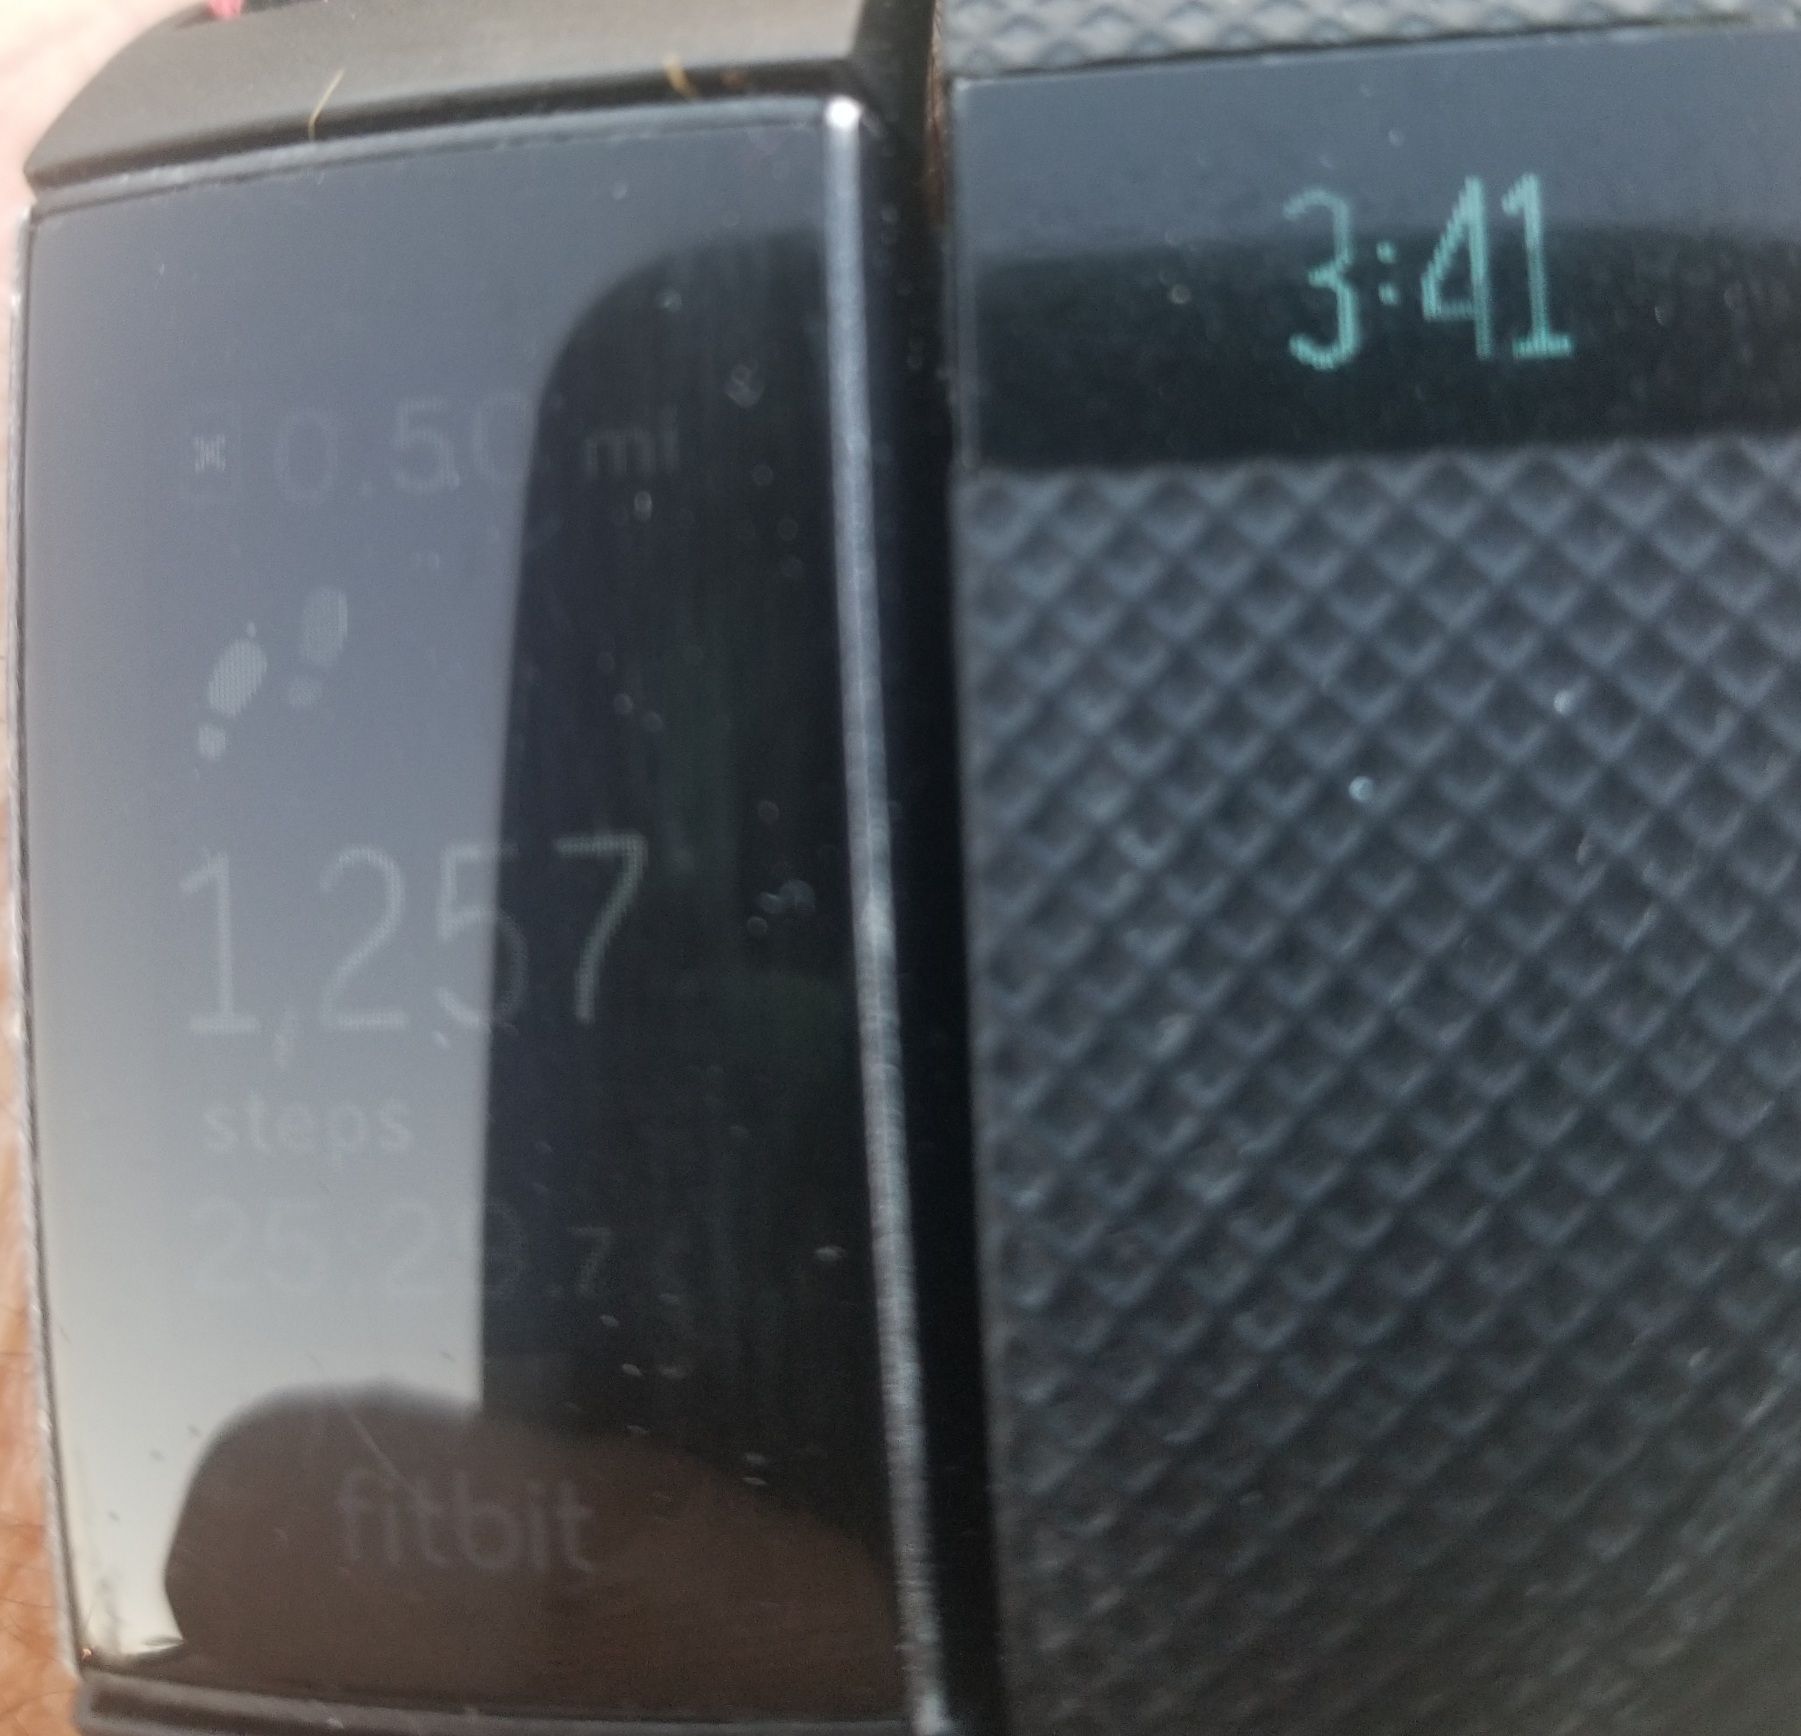 fitbit brightness charge 3